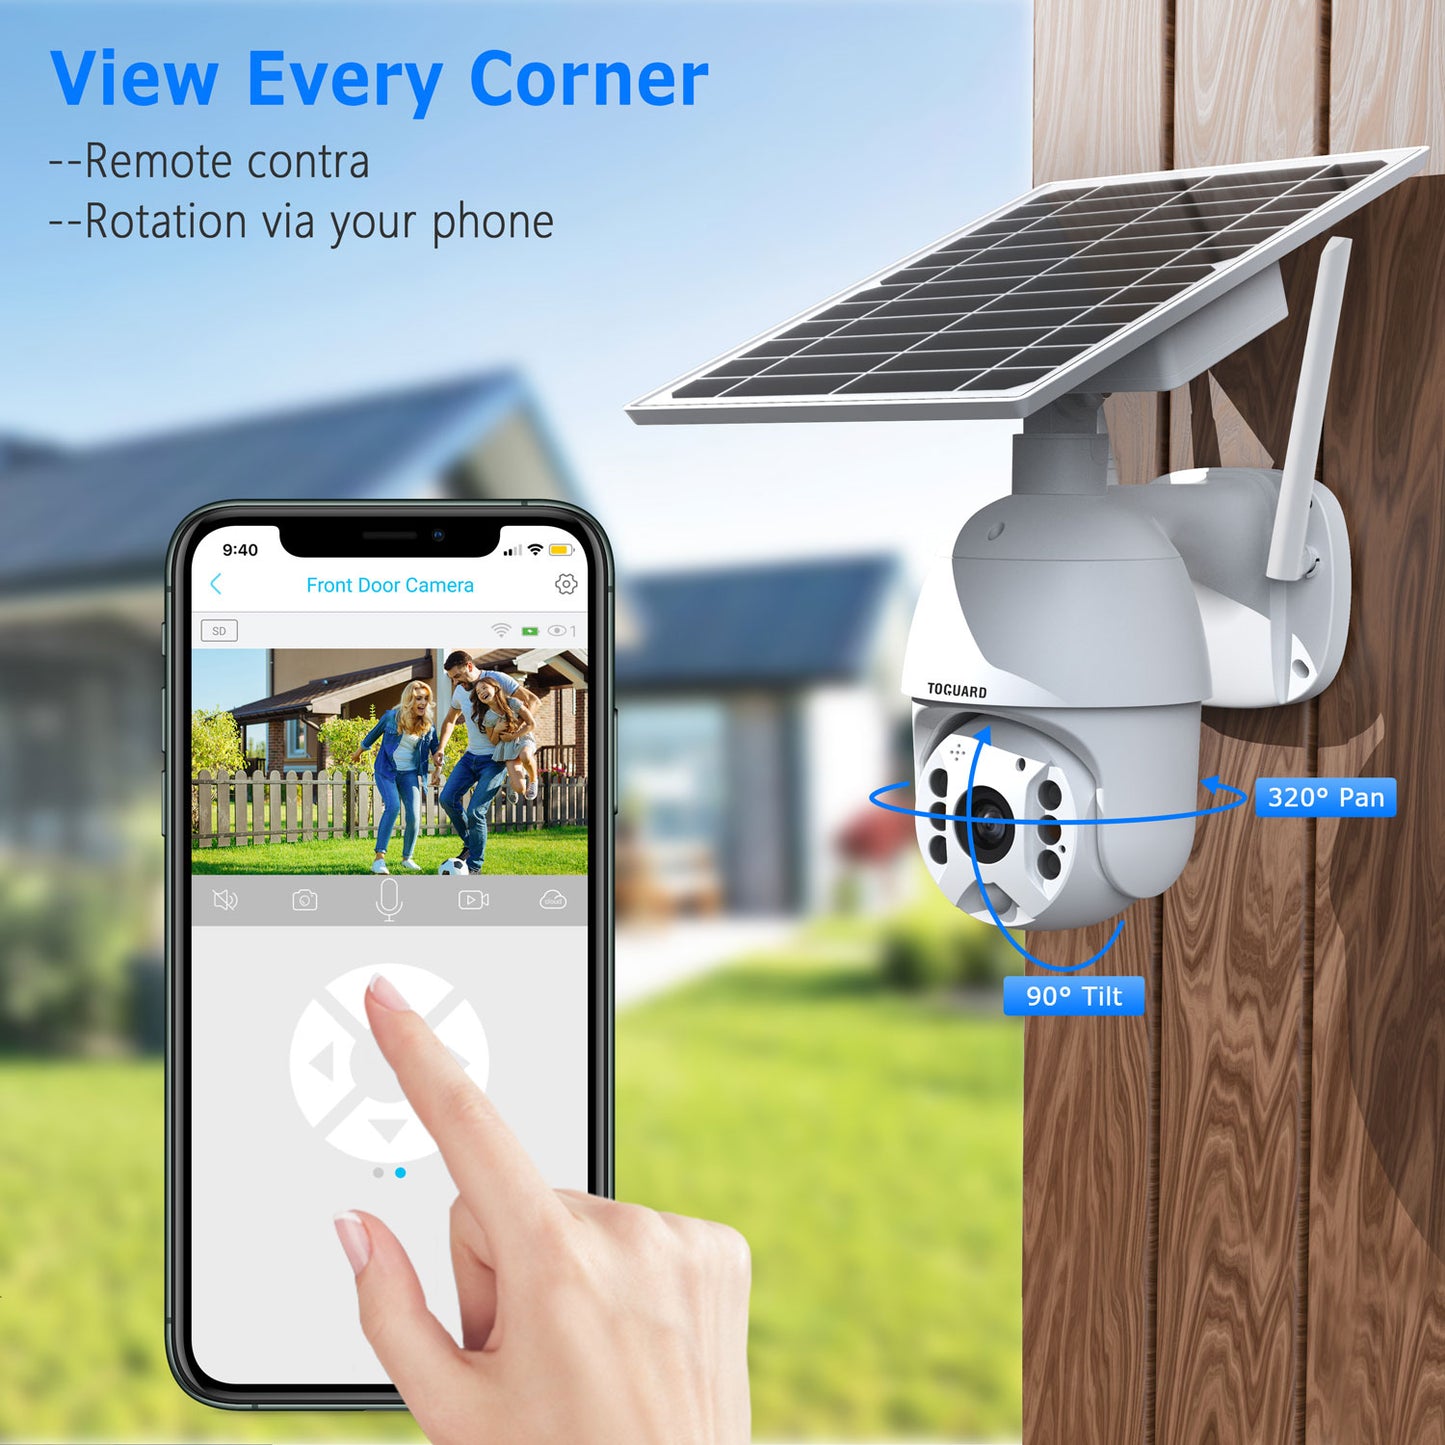 TOGUARD Solar Security Camera Outdoor, WiFi Wireless Security Camera 1080P for Home, Motion Detection, Color Night Vision,2-Way Talk,Cloud/SD Slot